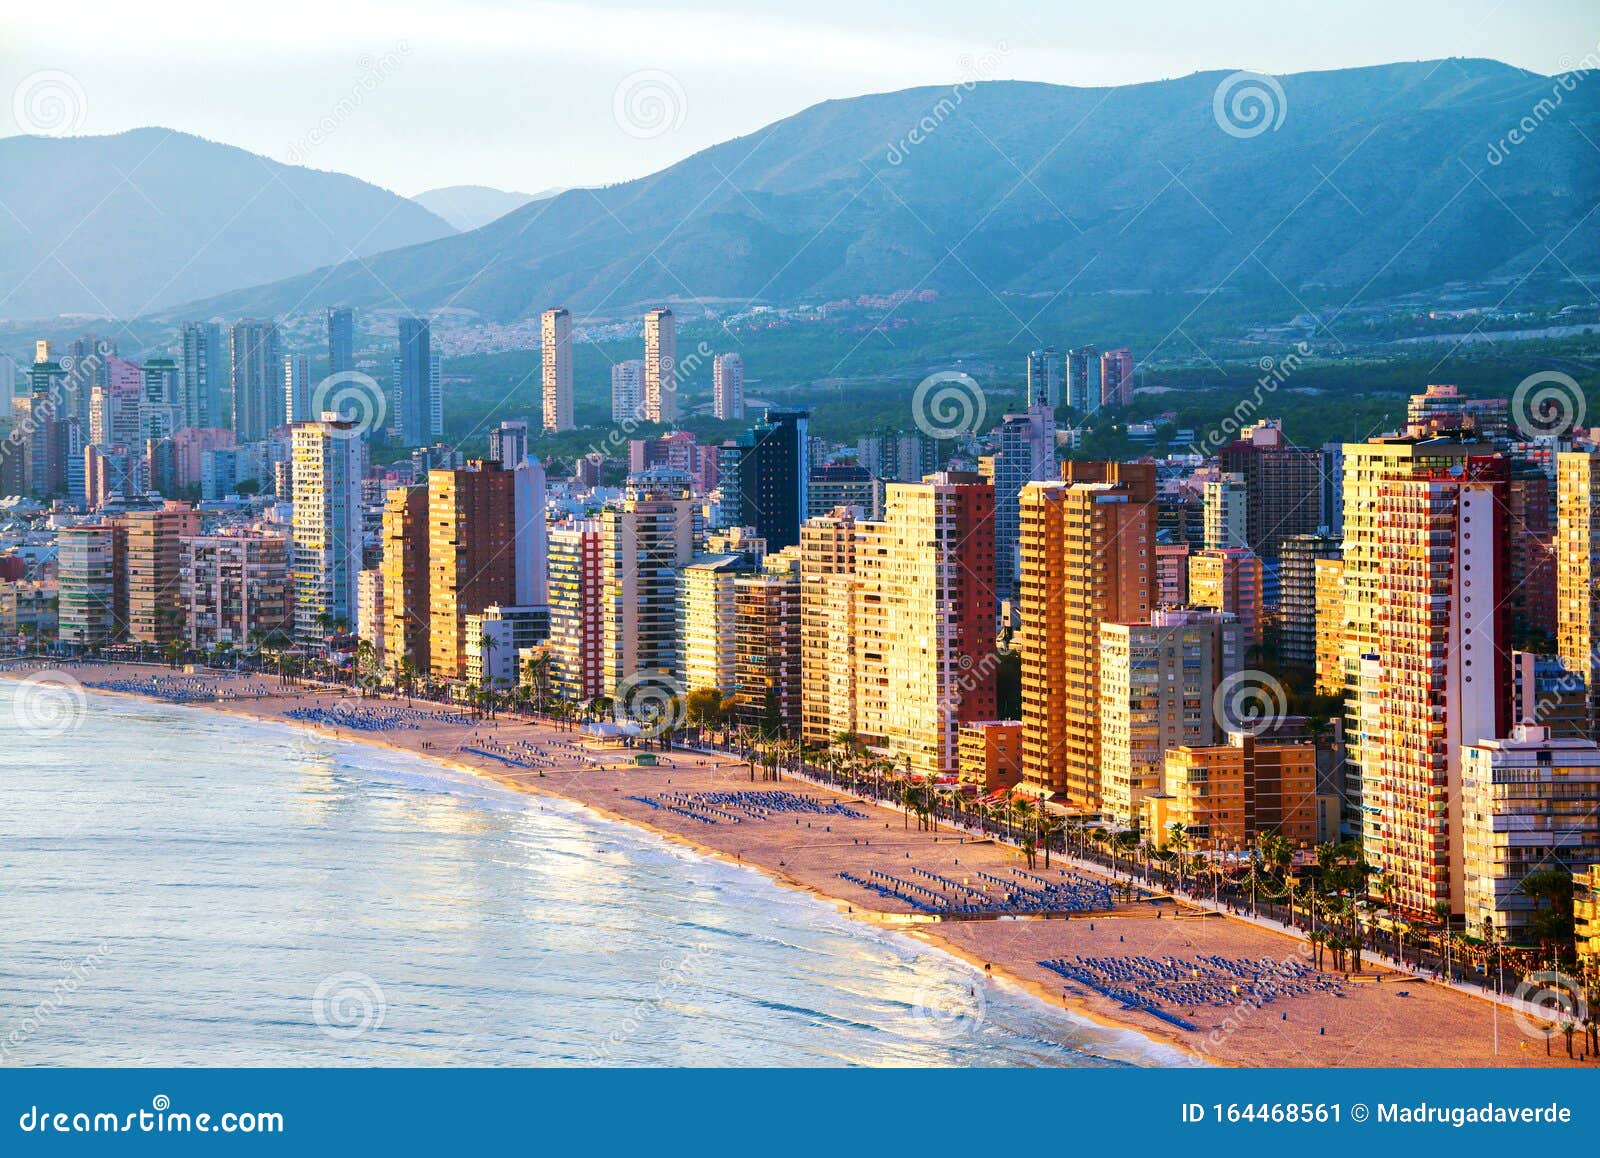 aerial view of summer resort benidorm, spain with beach and famous skyscrapers